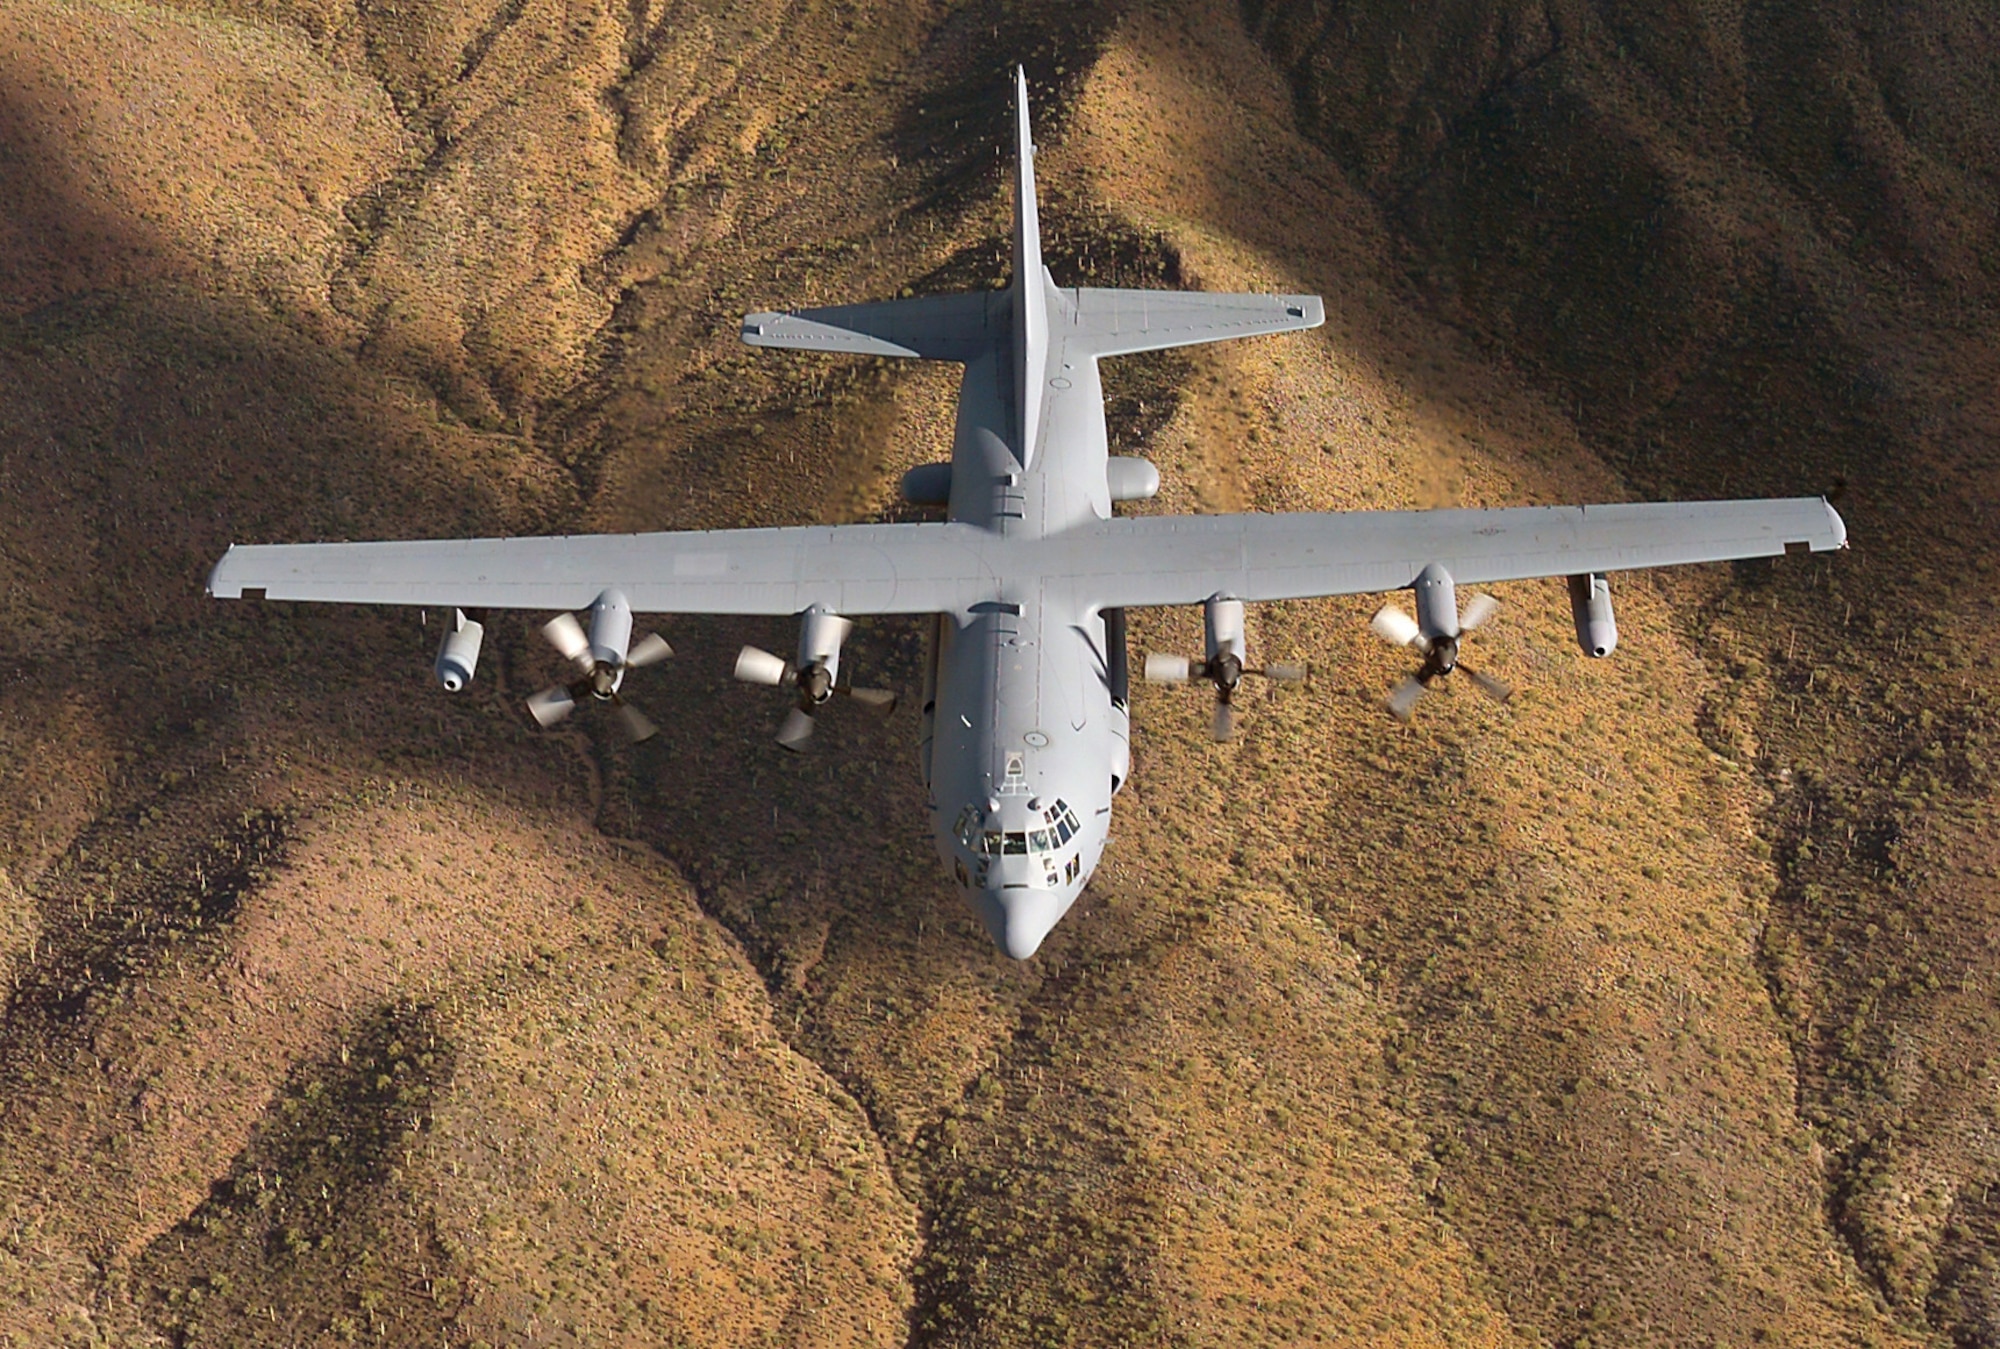 EC-130H Compass Call
Primary function: Electronic warfare, suppression of enemy air defenses and offensive counter information. Dimensions: Wingspan 132 ft. 7 in.; length 97 ft. 9 in.; height 38 ft. 3 in. Speed: 300 mph. Range: 2,295 miles unrefueled. Crew: 13.